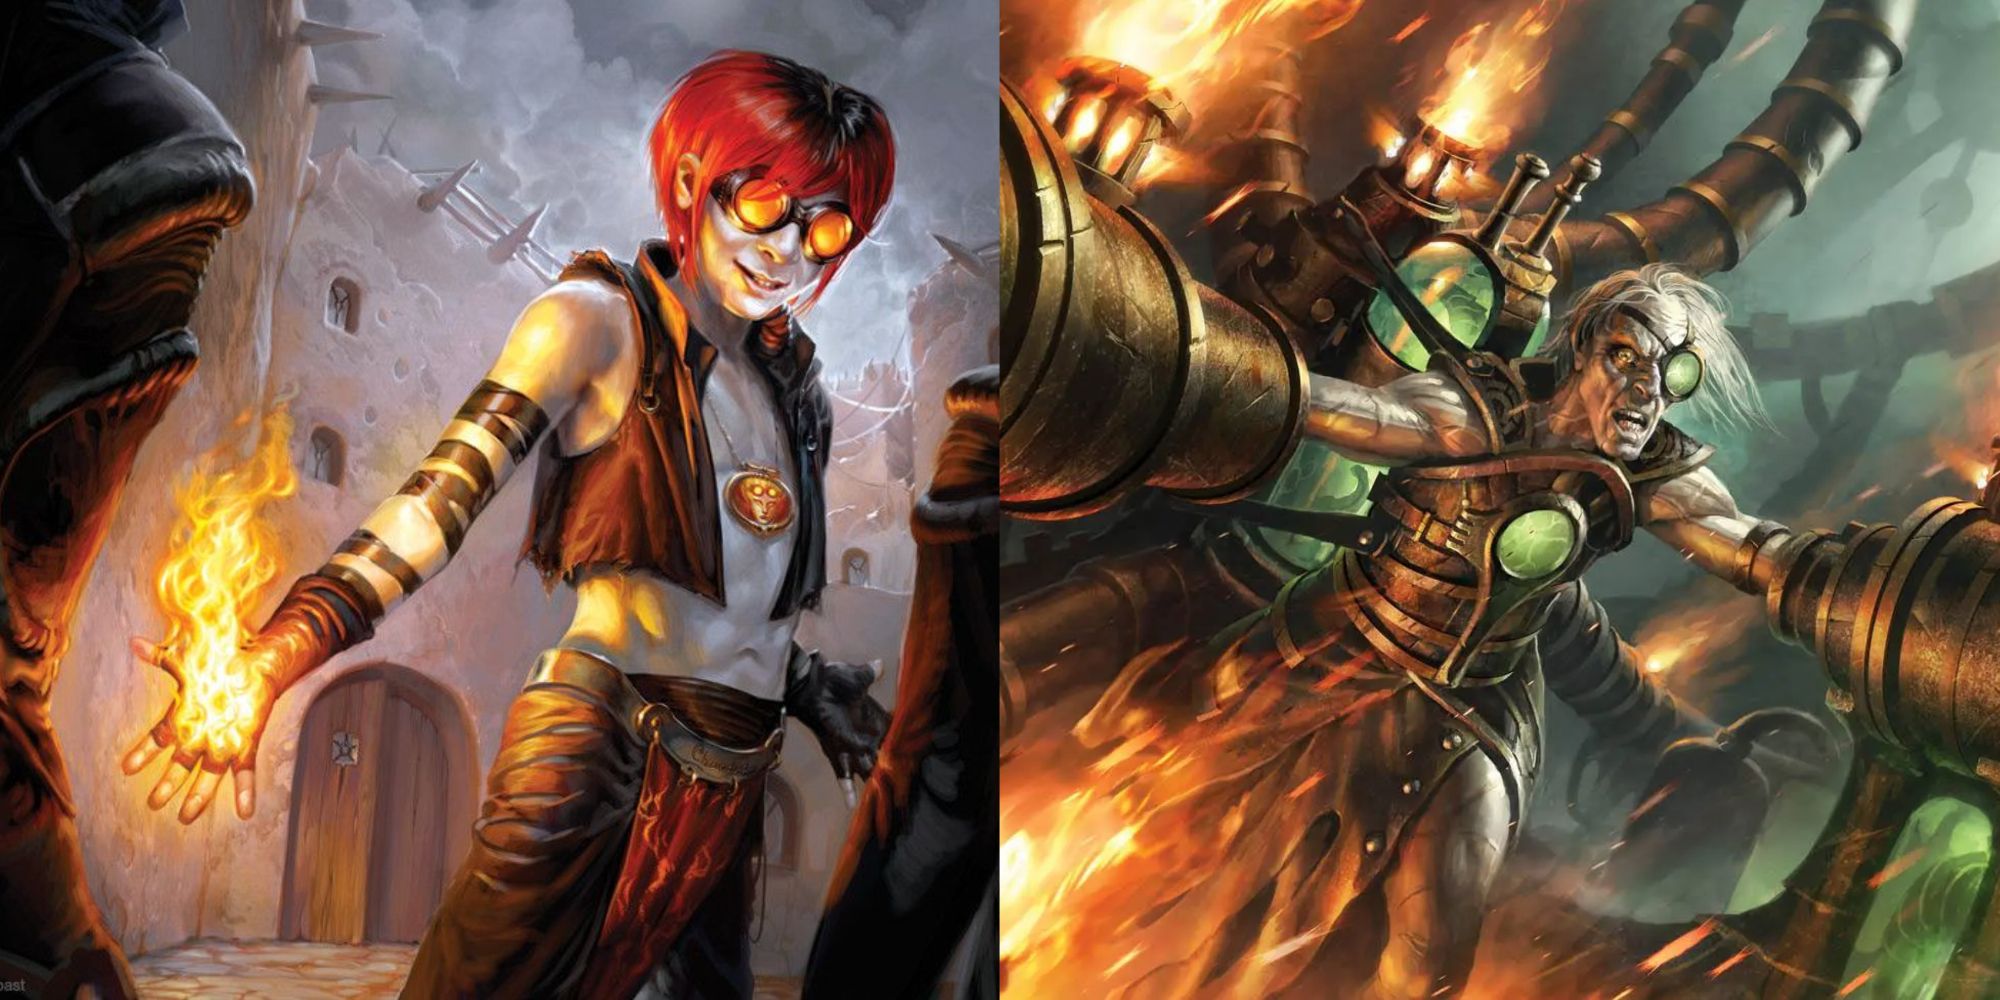 Young Pyromancer and Themro Alchemist artworks